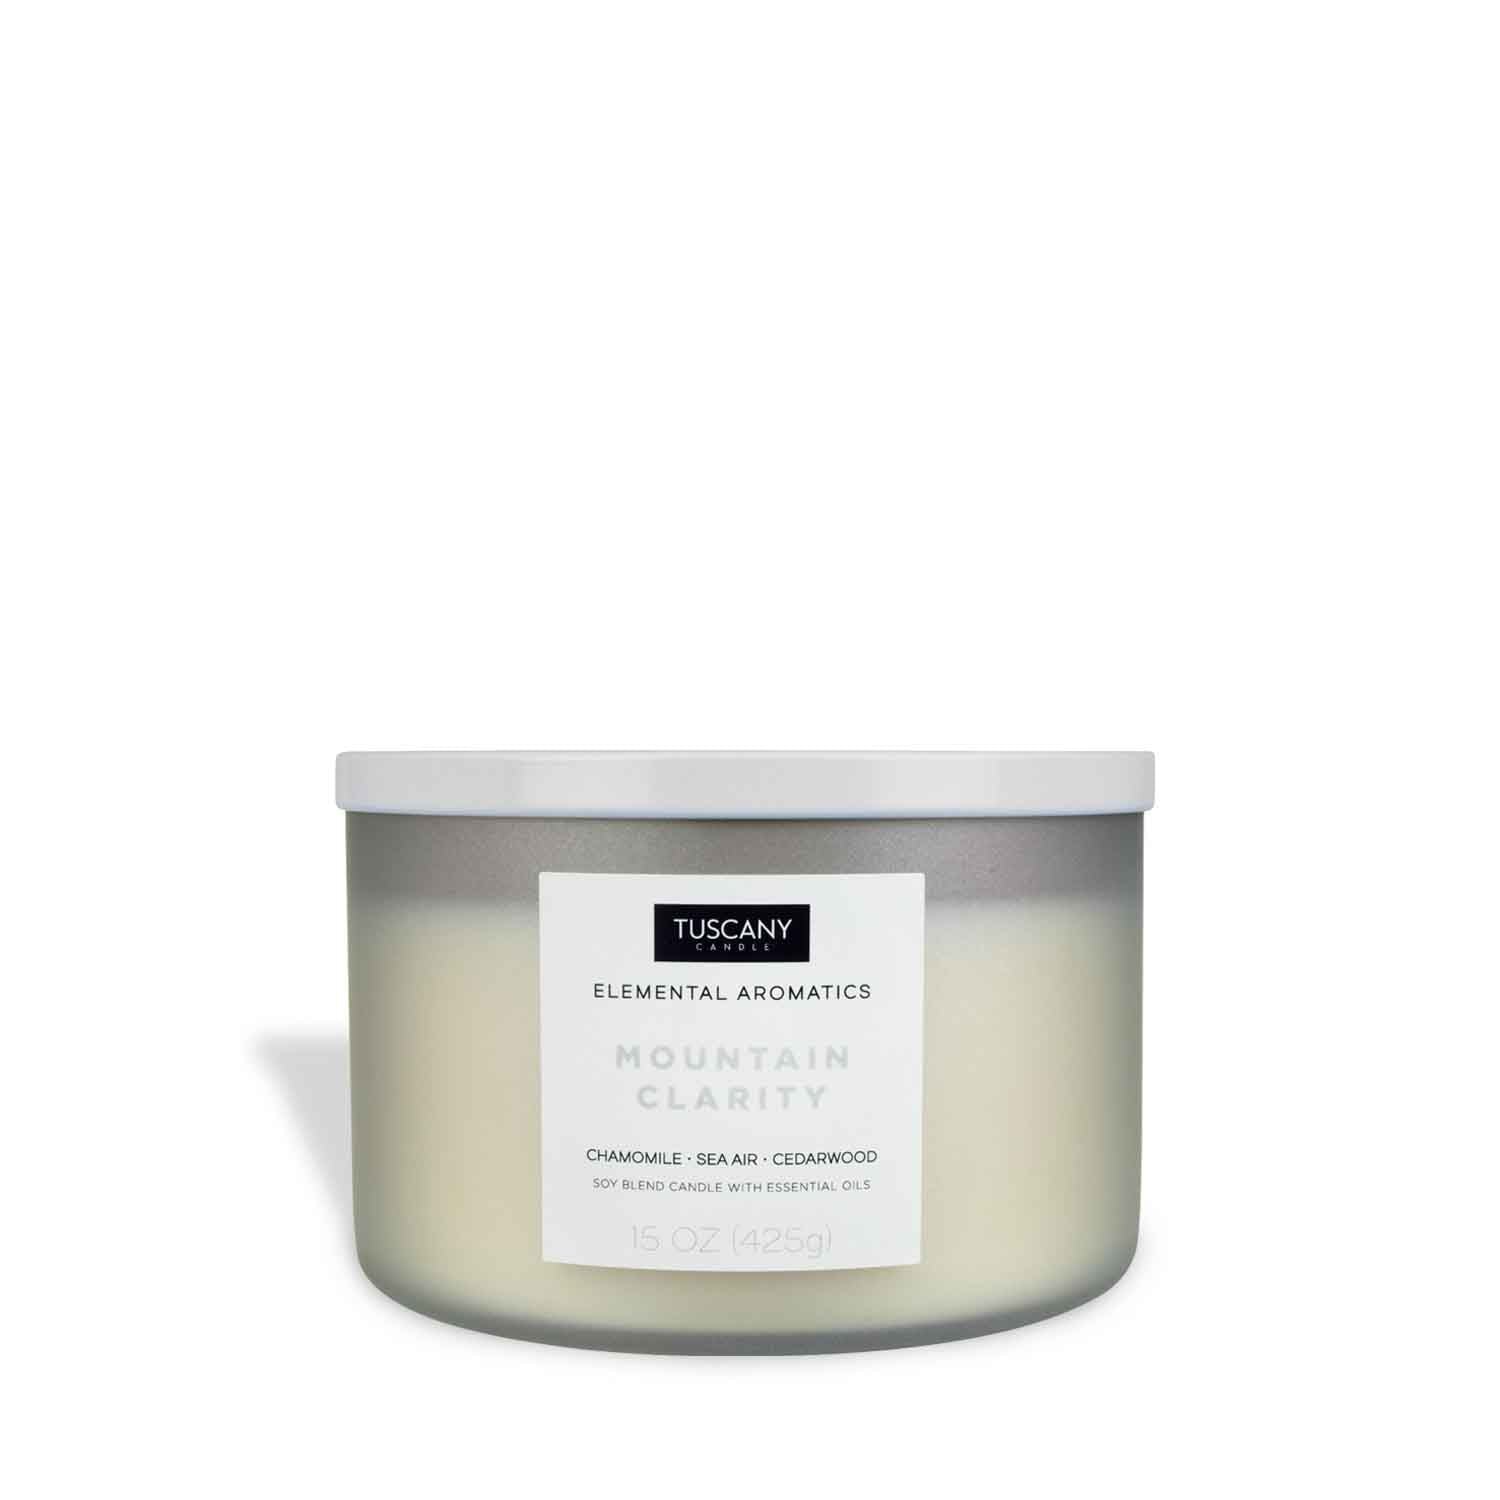 A Mountain Clarity scented candle in a white container, exuding tranquility and enhancing well-being, set against a serene white background.